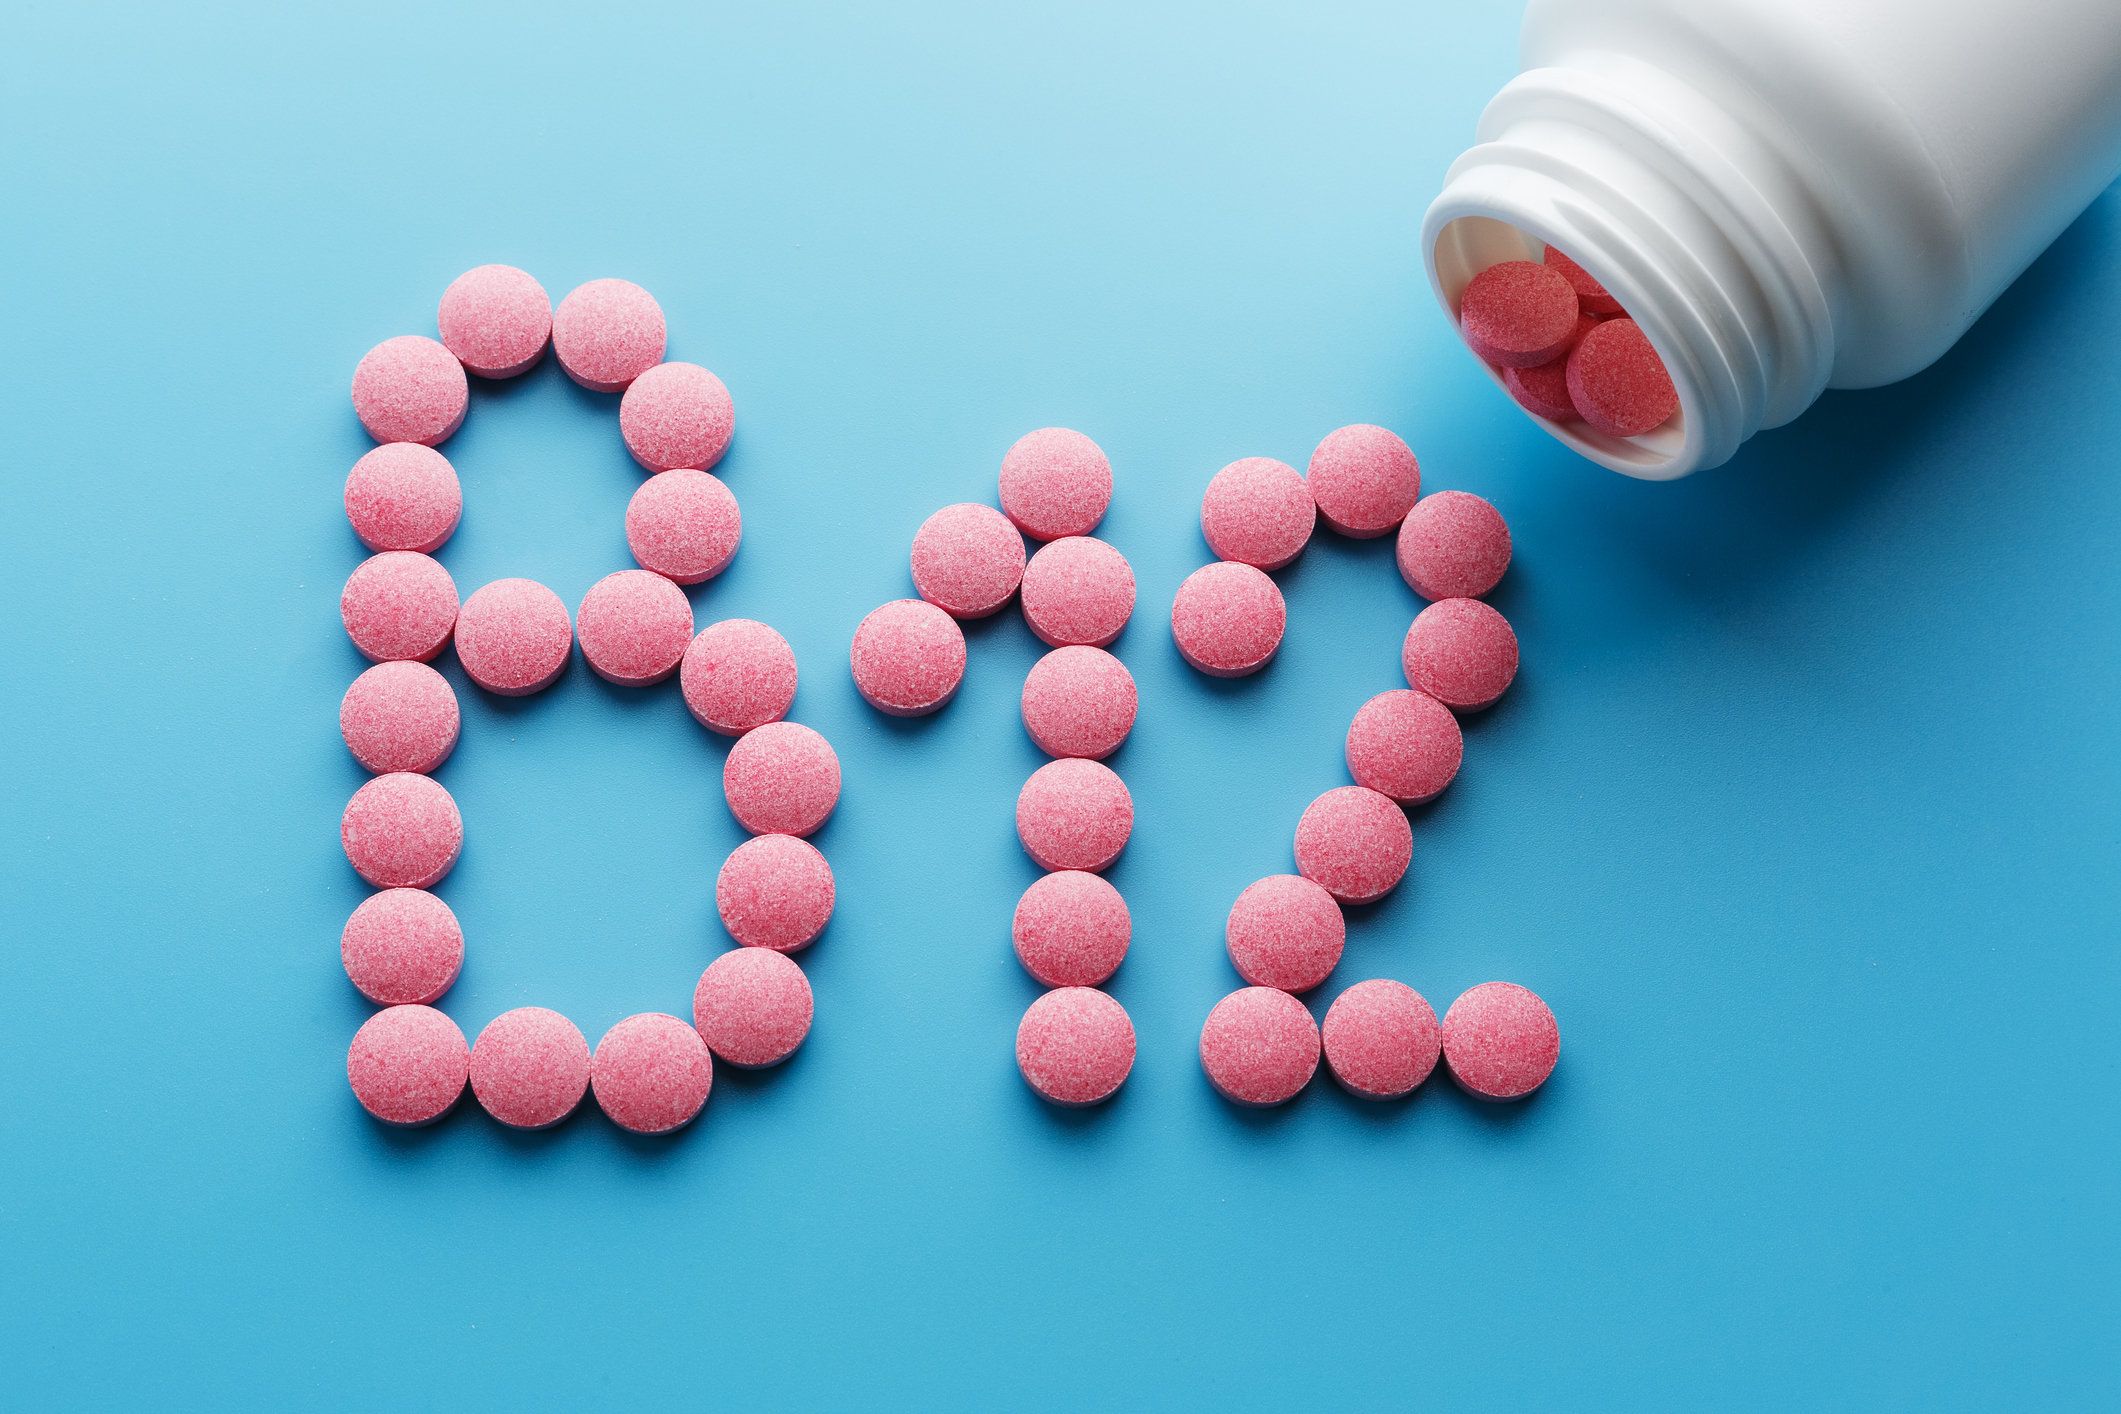 Pink pills on a blue background that spell out "B12"